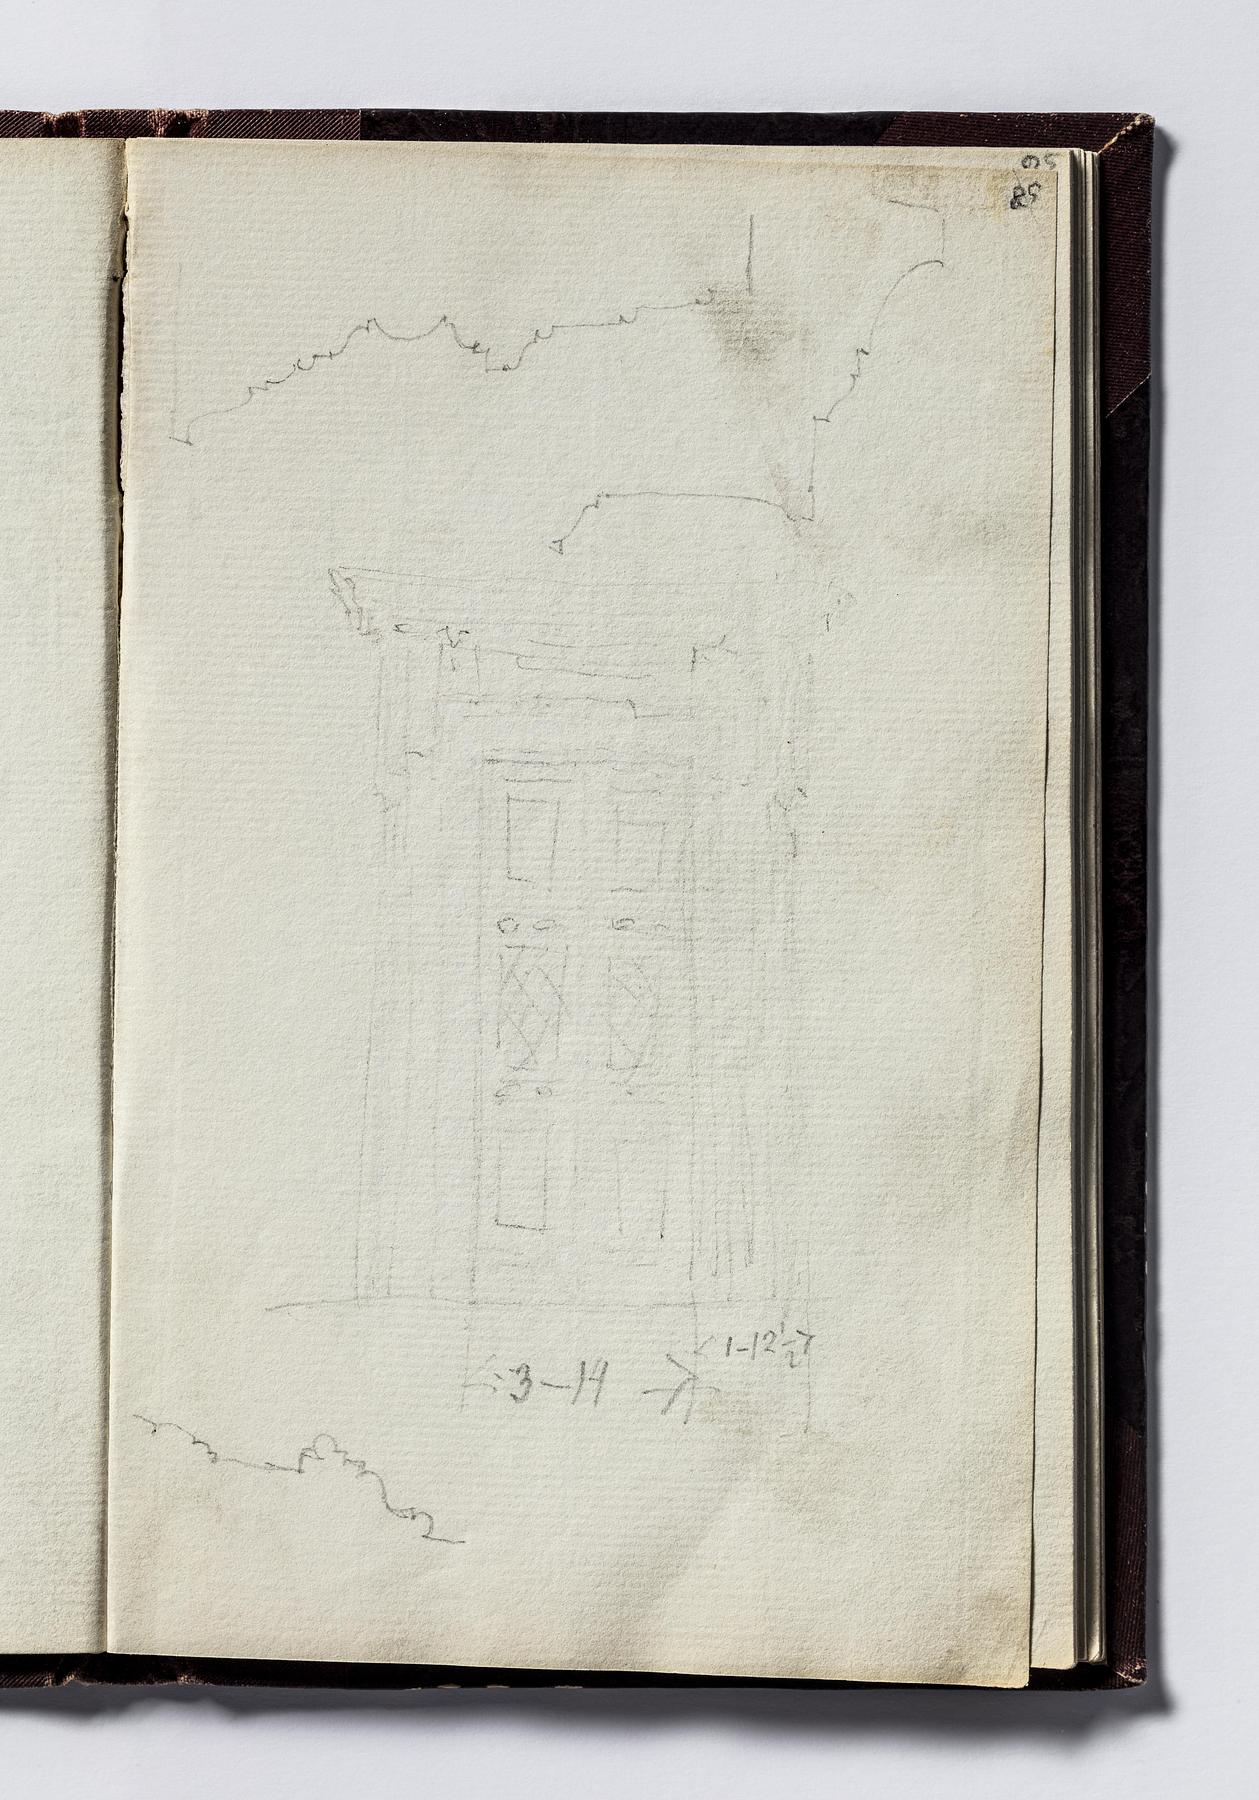 Portal for Thorvaldsens Museum and Profiles for Cornices, D1778,58